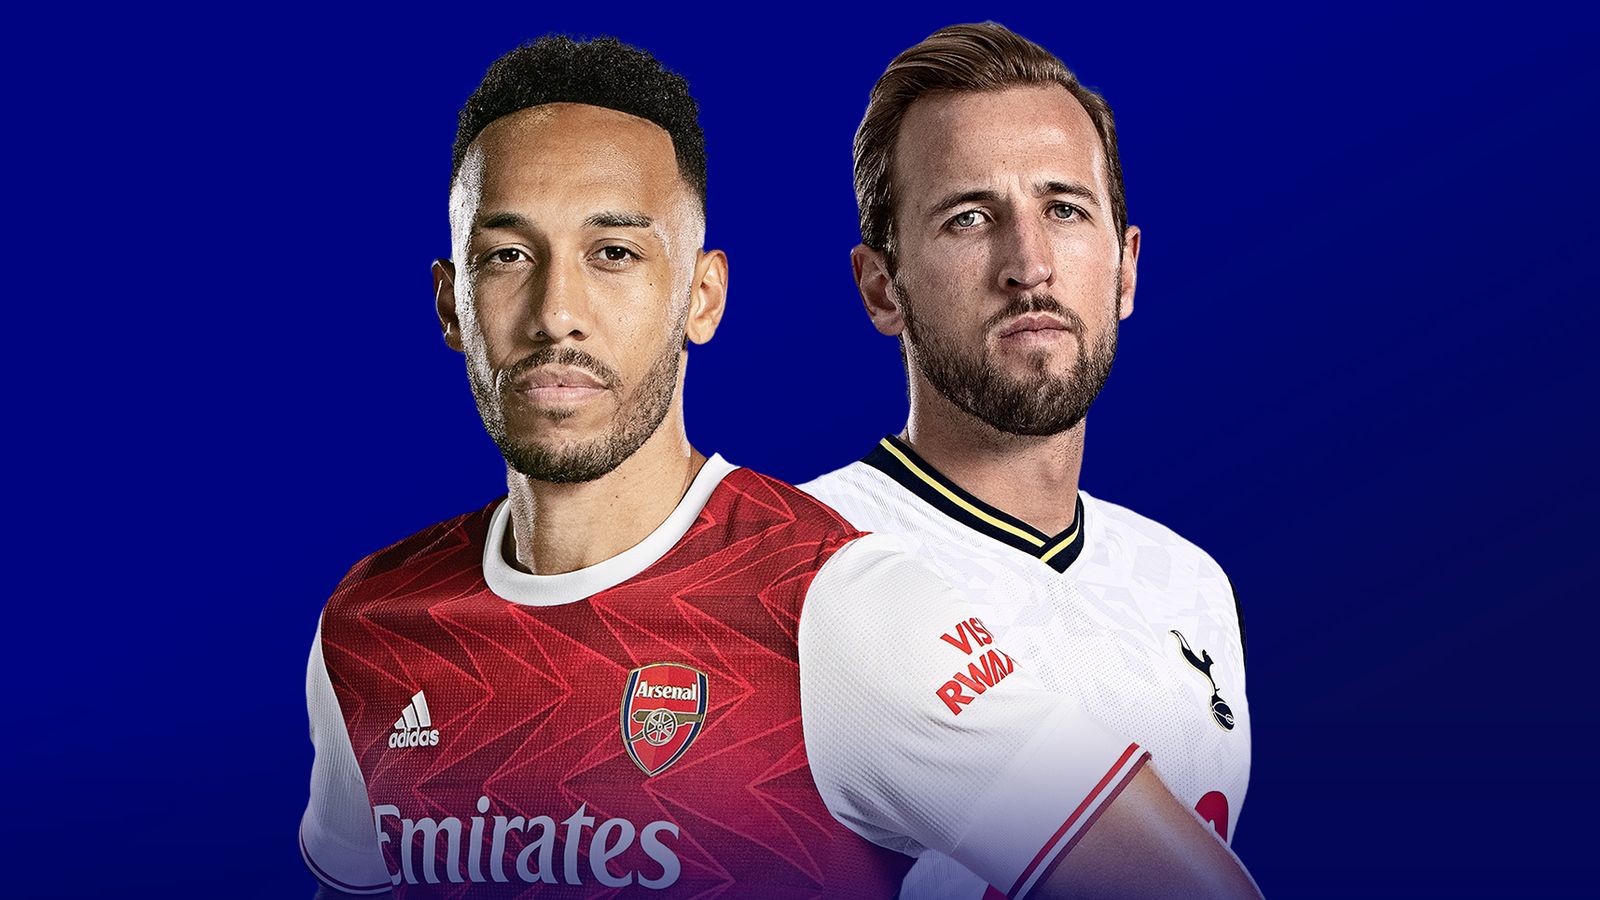 North London derby and Tottenham vs Chelsea among live Premier League on Sky Sports in September